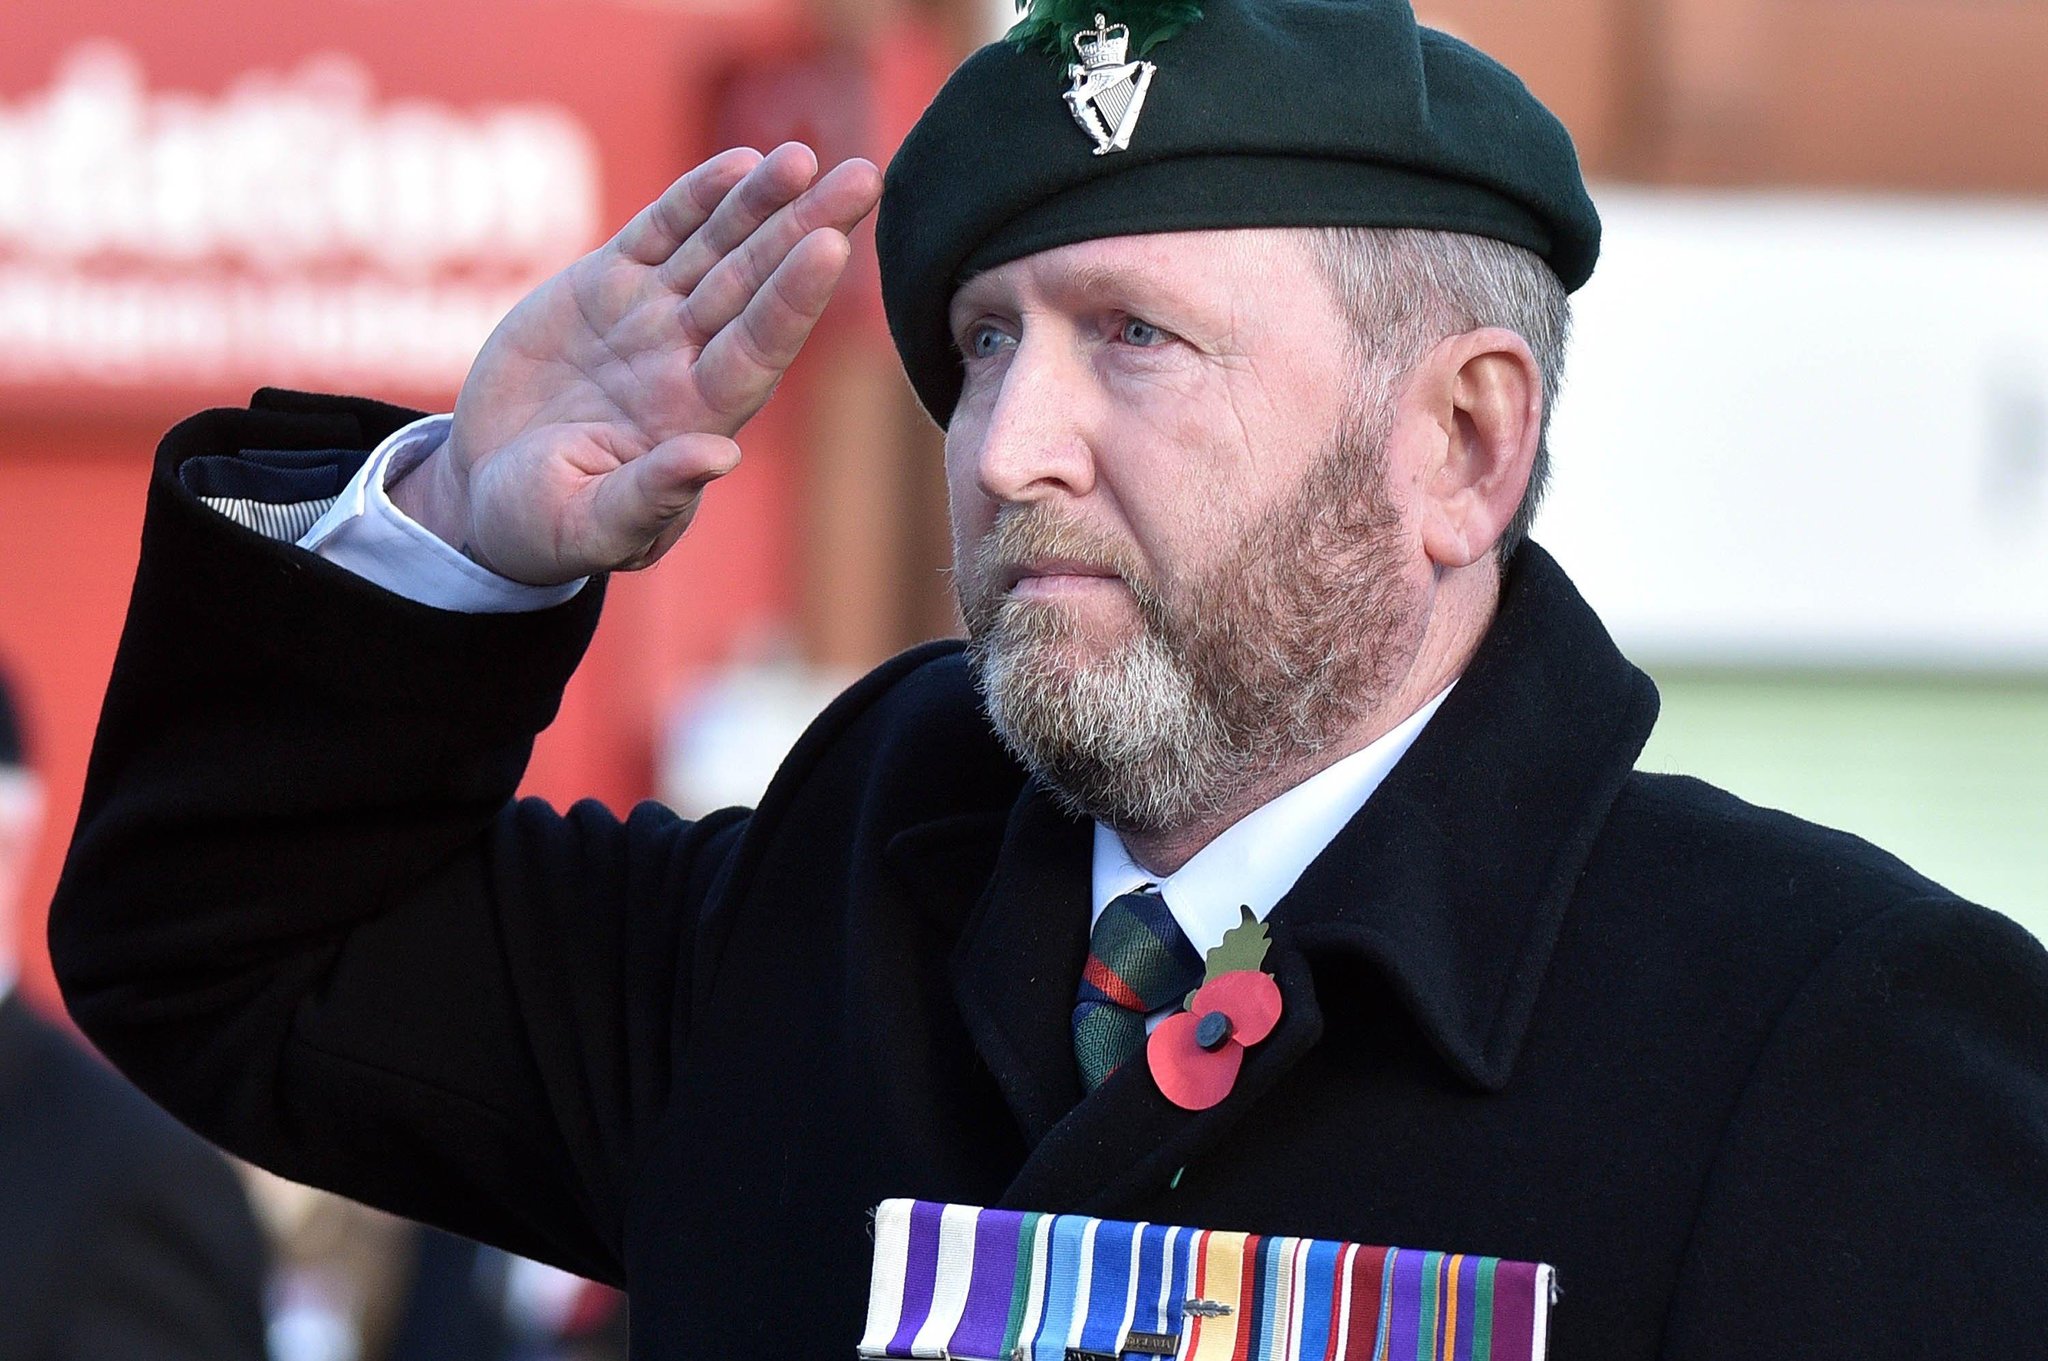 Those calling me a traitor are not the people I stood beside in battle: Beattie